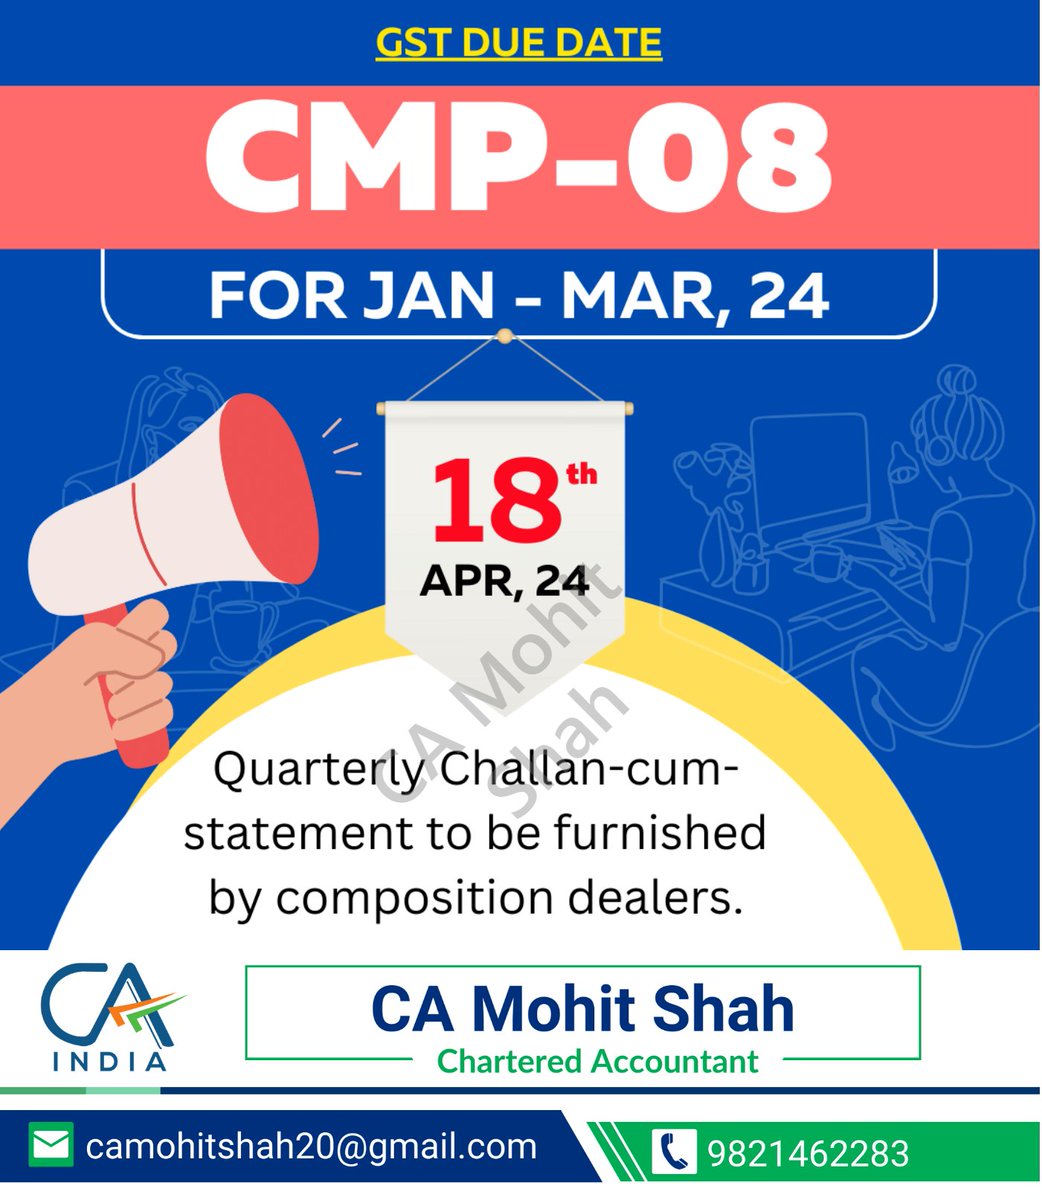 Composition dealers, 18th April,2024 is the last date to file CMP-08 for Jan-Mar 2024 quarter. Ensure timely filing to avoid Late Fees.

#CMP08 #CompositionScheme #GSTReturns #TaxFiling #SMEs #SmallBusiness #TaxCompliance #GSTIndia #BusinessTaxation #QuarterlyReturns